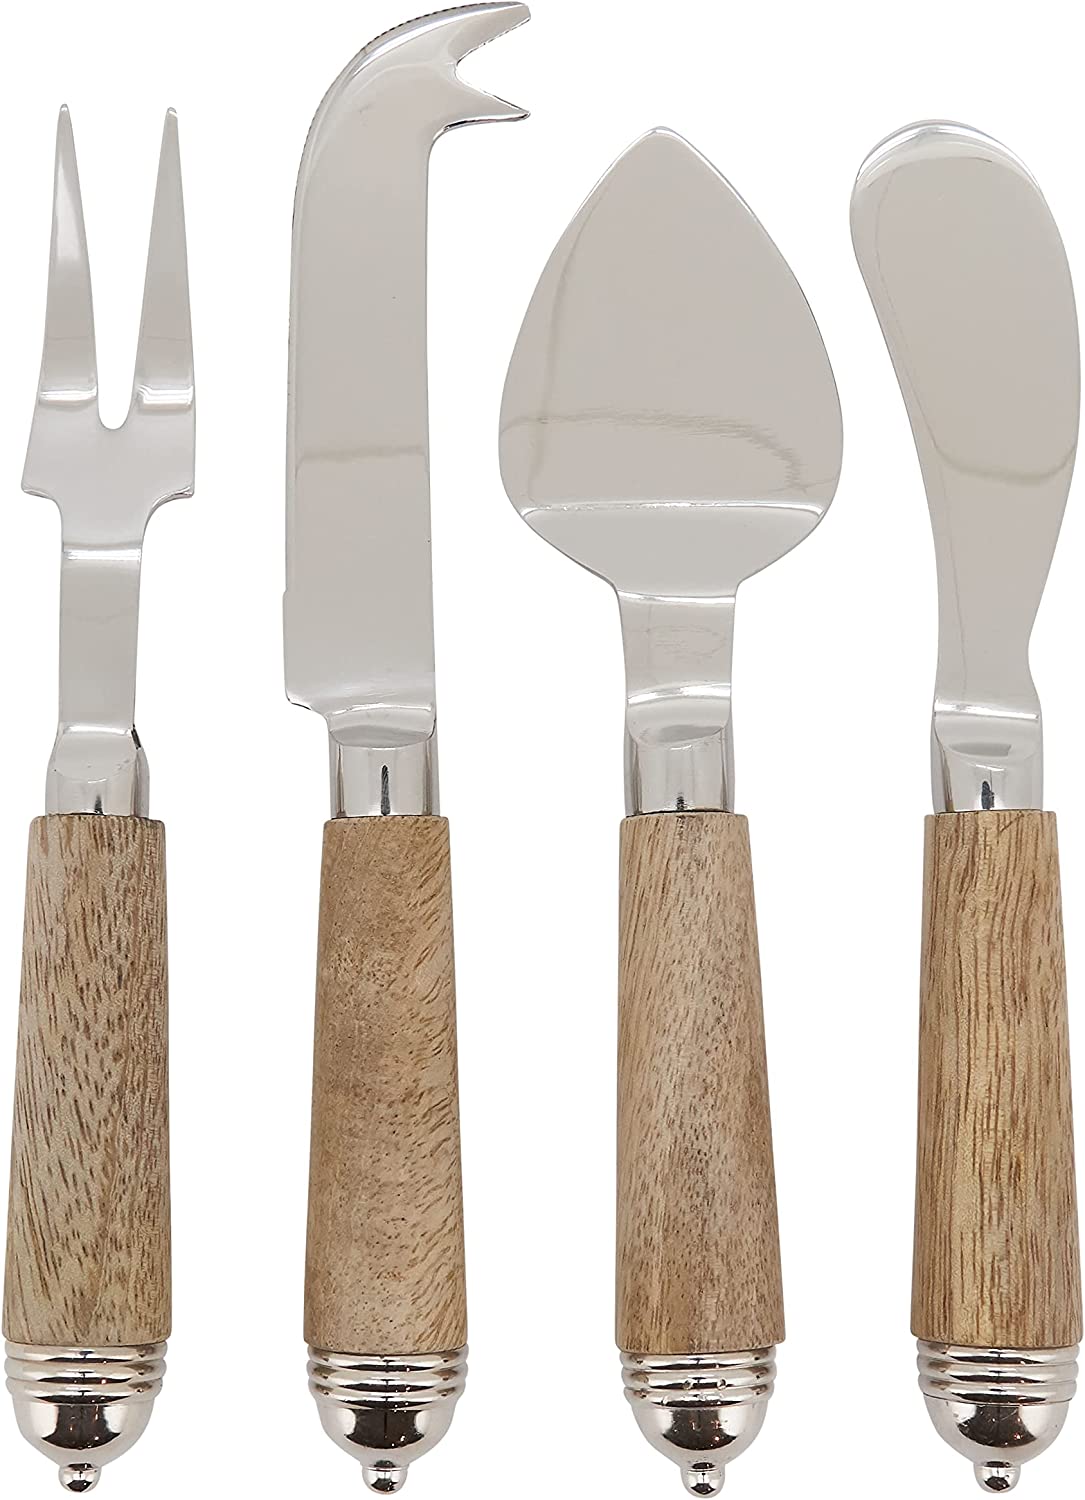 Cheese Knife Cutlery - Set of 4